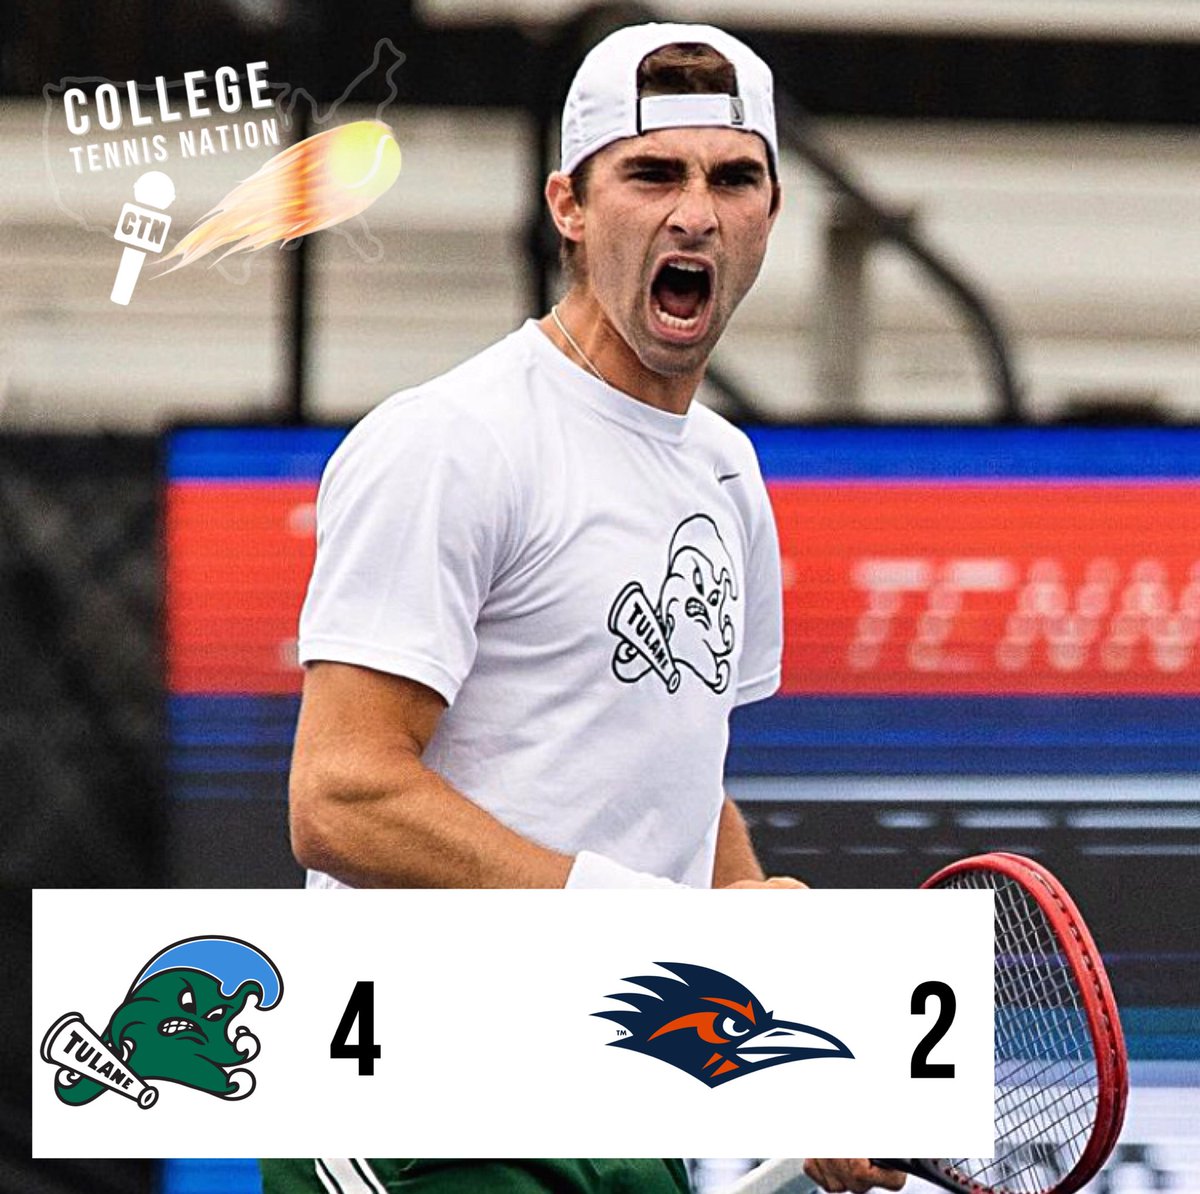 NO. 10 SEED TULANE MOVES ON 🌊 

Final Score:
Tulane def. UTSA 4-2

#10 seed Tulane defeats #7 seed UTSA in the first round of the AAC Tournament, and moves on to face SMU in the Quarterfinals.